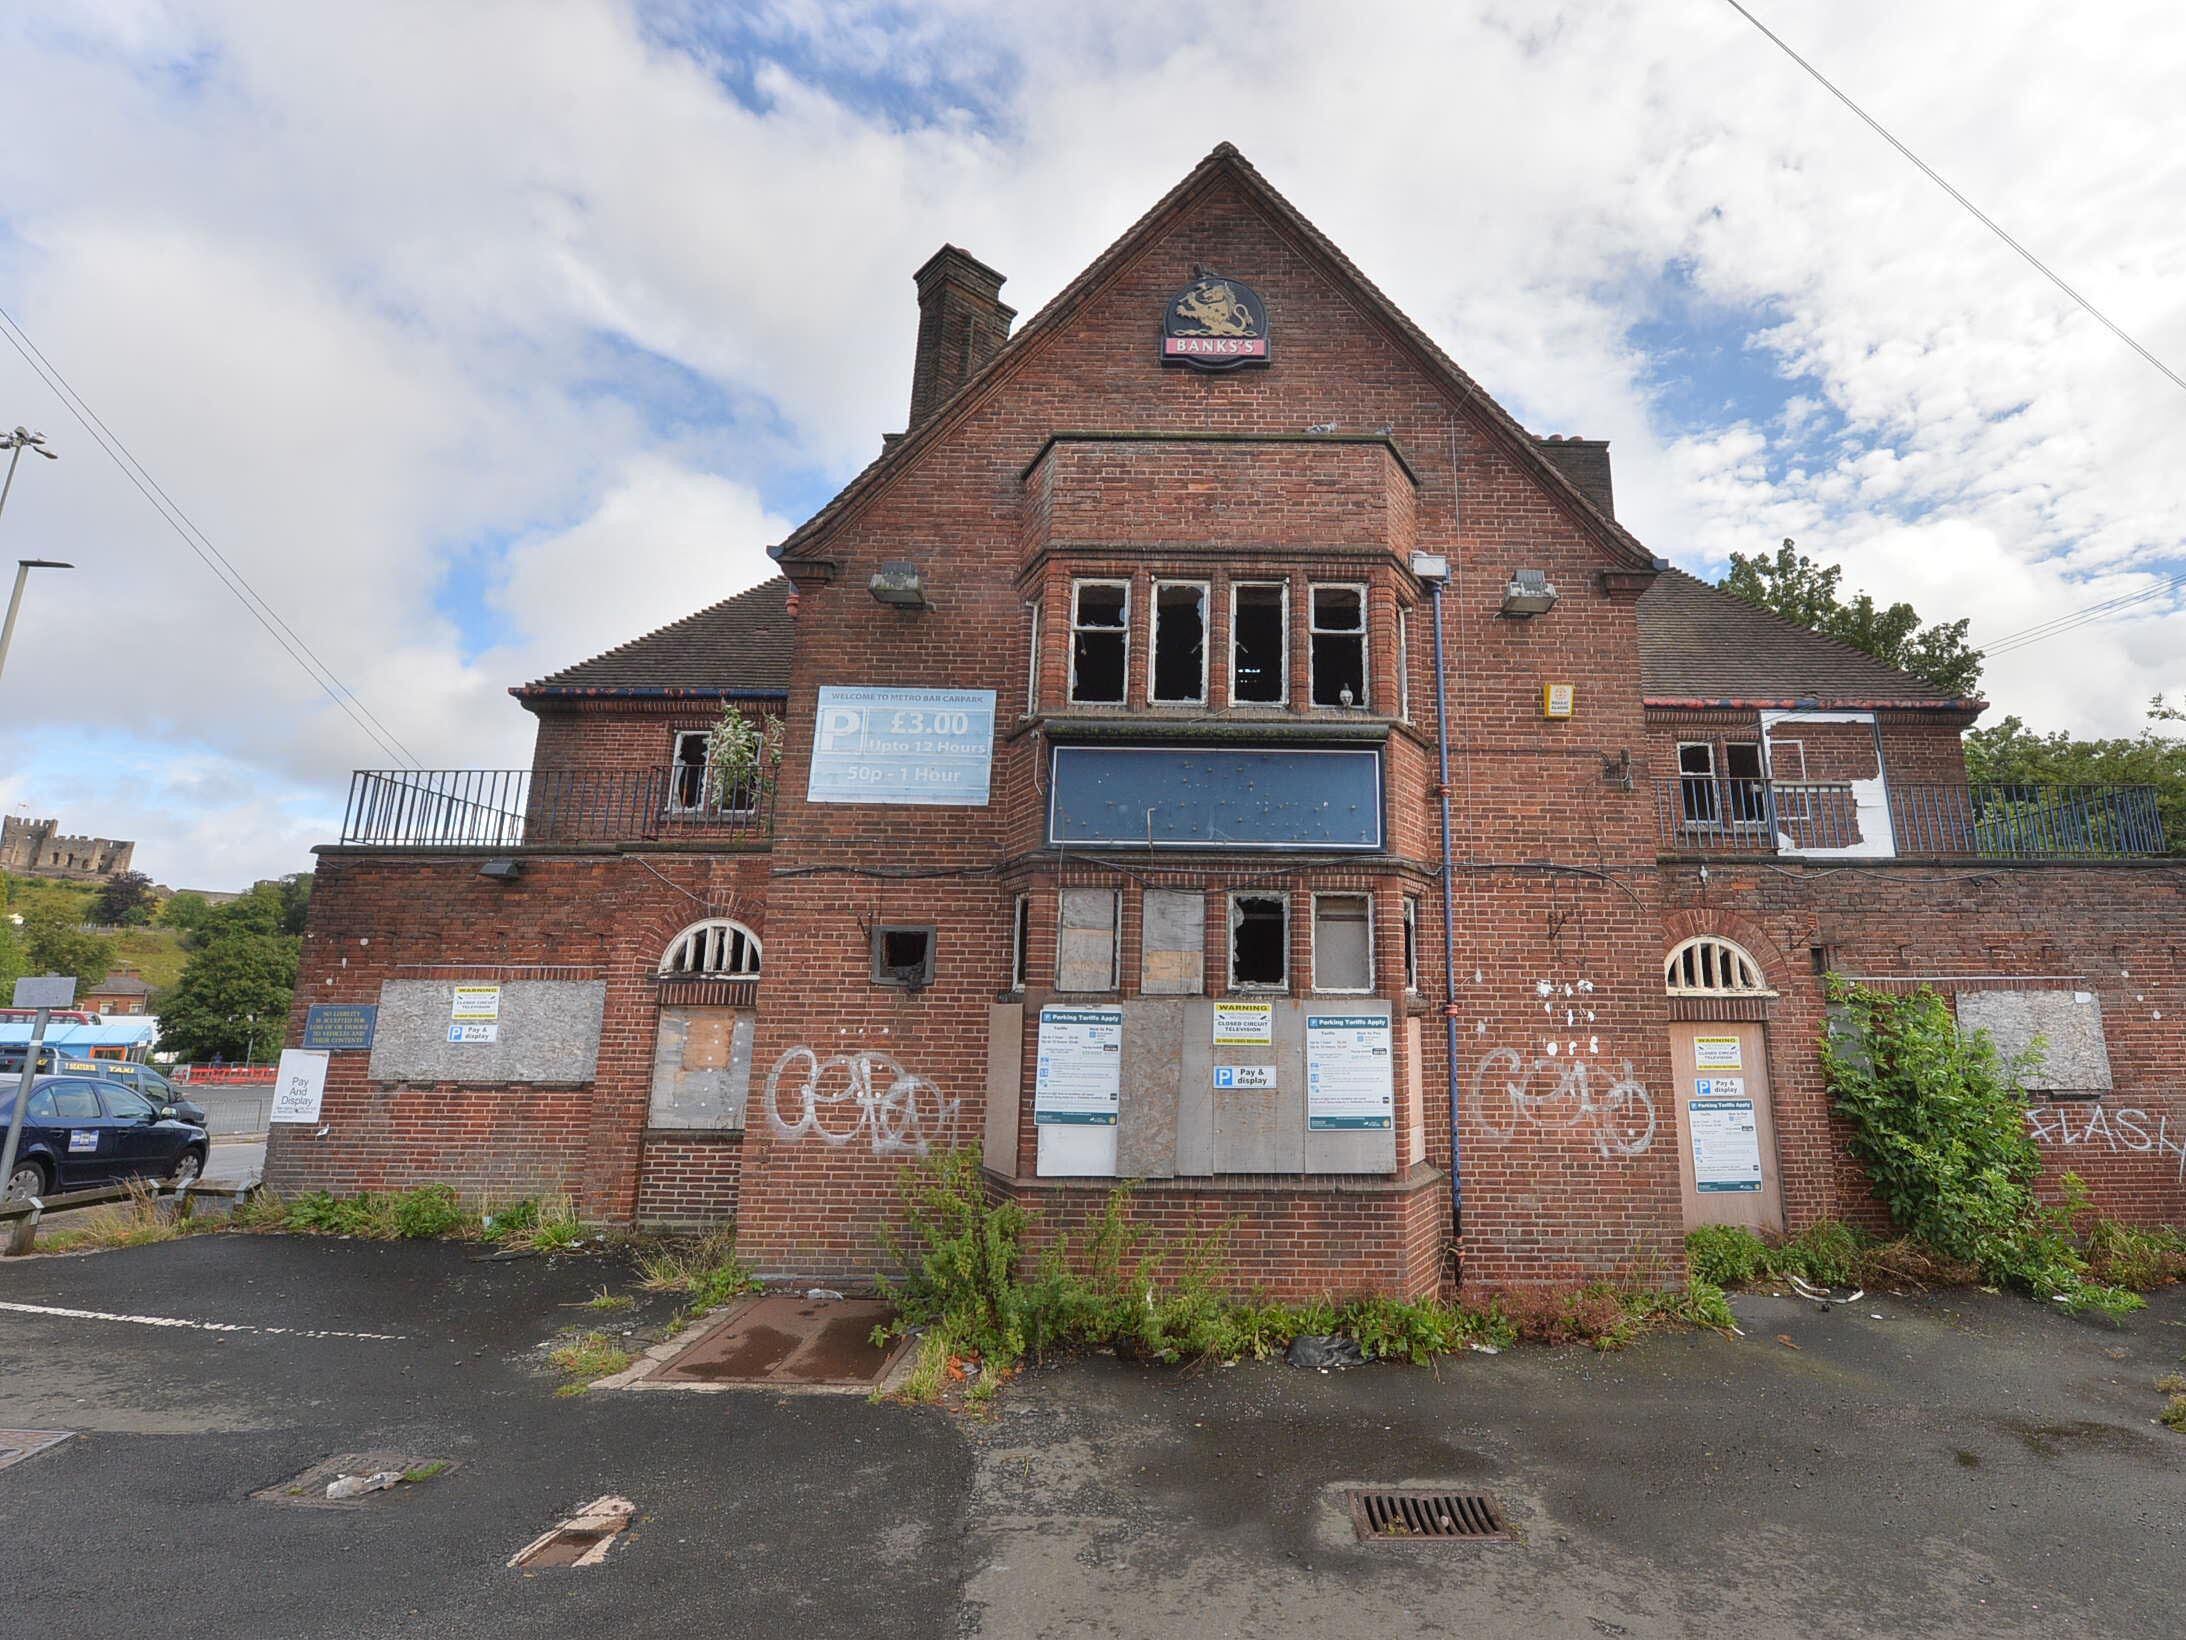 Historic former pub could be saved from bulldozers under shop plan